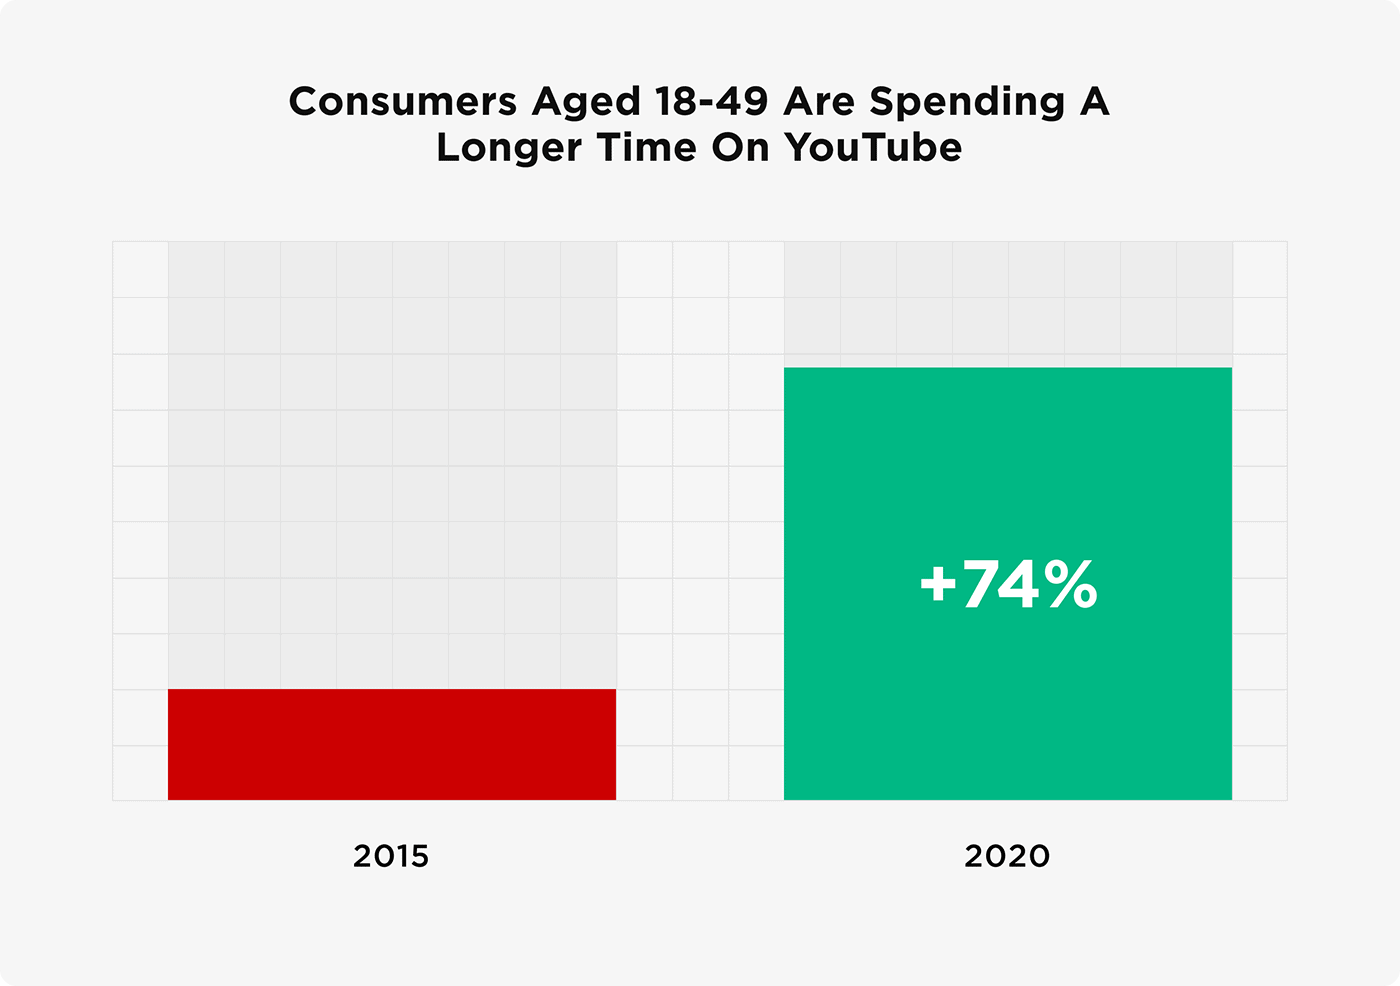 Consumers aged 18-49 are spending a longer time on YouTube